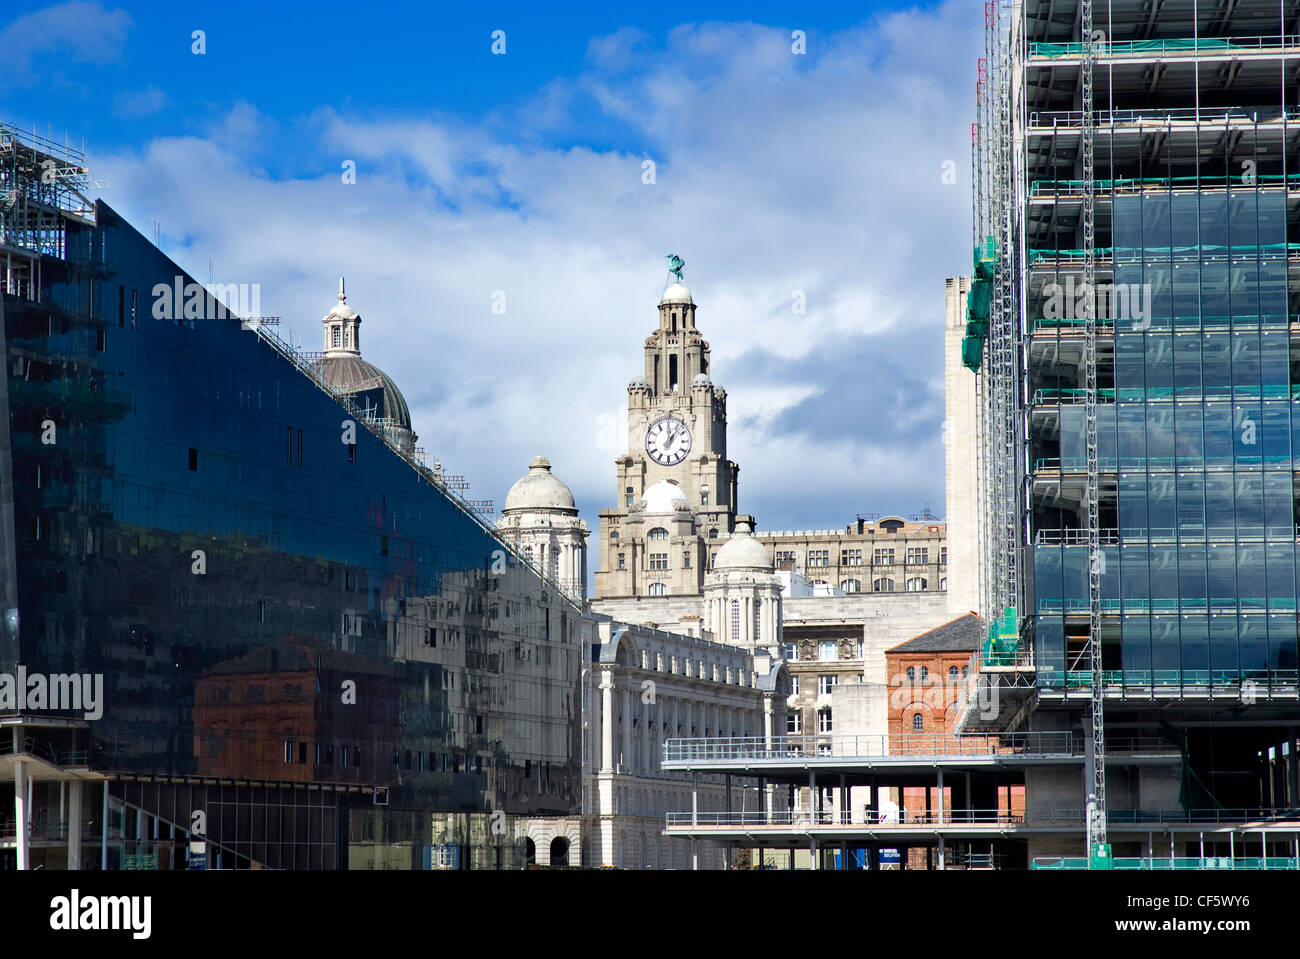 The Royal Liver Building between modern office and residential developments on the Pier Head. Stock Photo